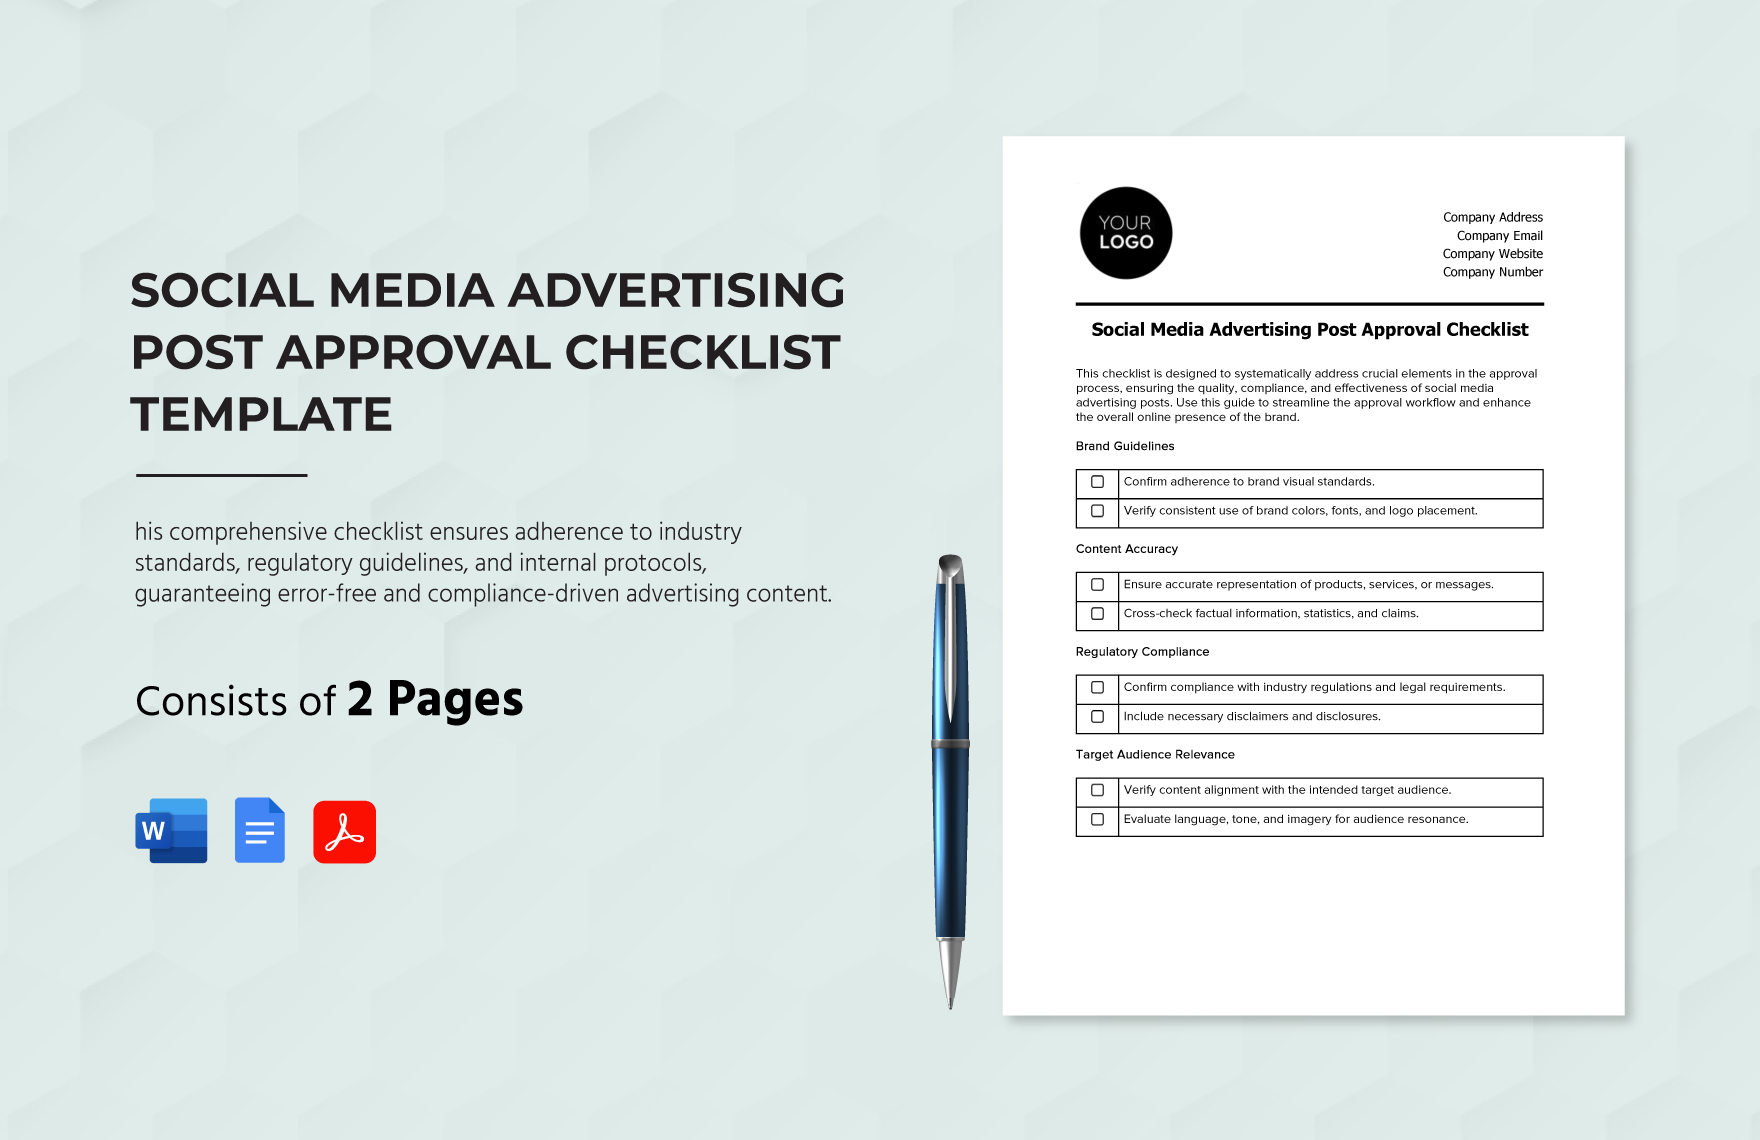 Social Media Advertising Post Approval Checklist Template in Word, Google Docs, PDF